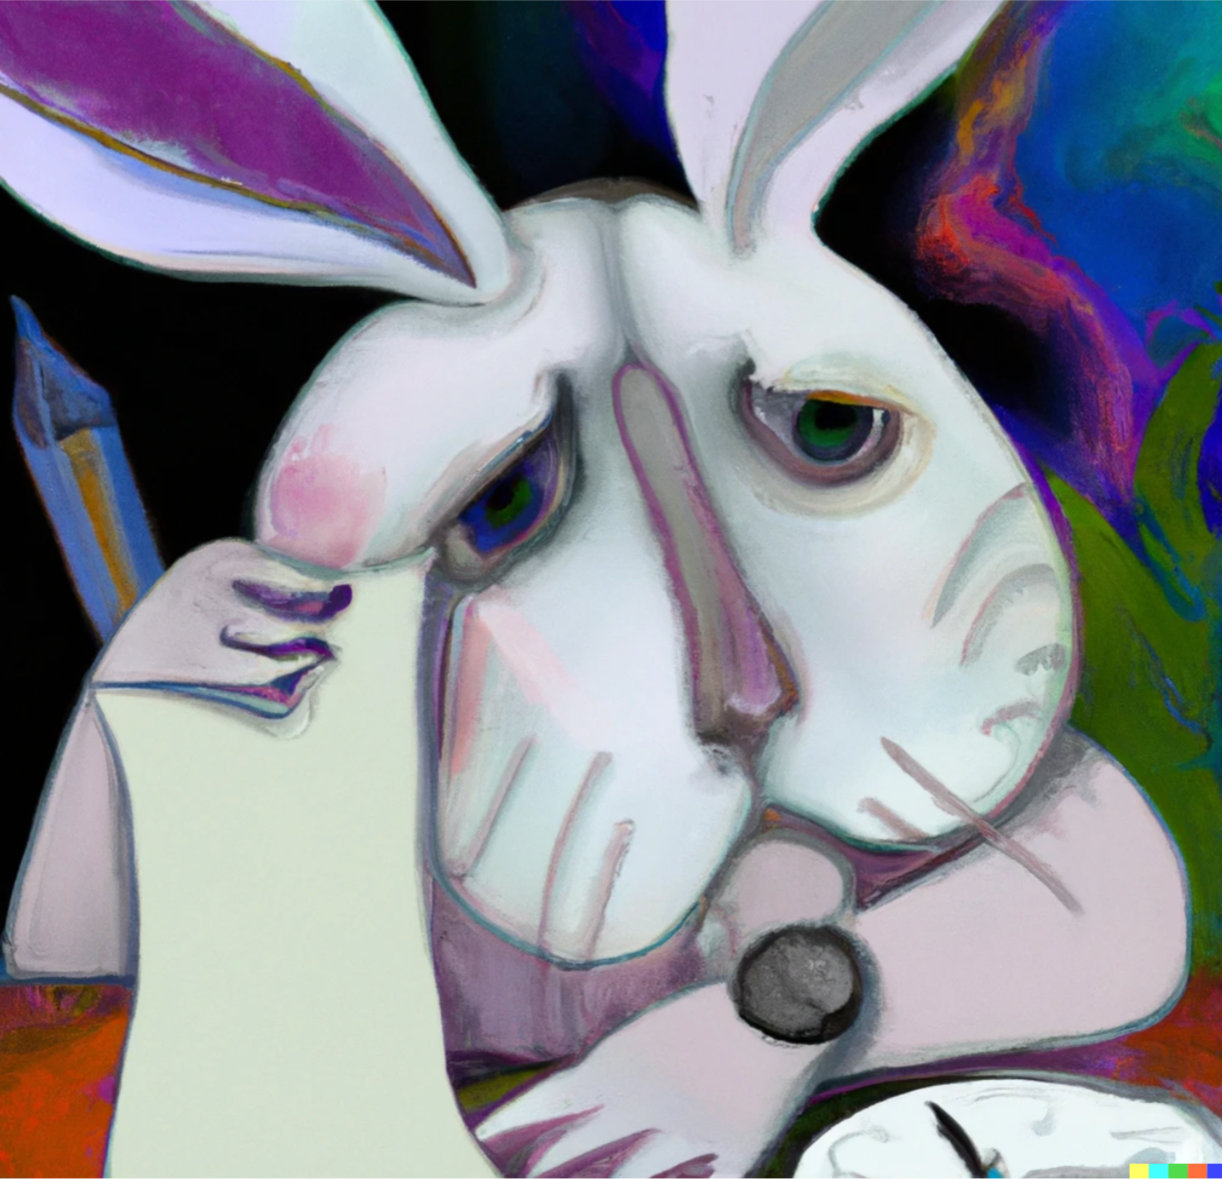 Prompt: Create an image of the White Rabbit from Alice in Wonderland worried that it's late writing a report. Create the image with bright colors in the style of Georgia O'Keefe's artwork.